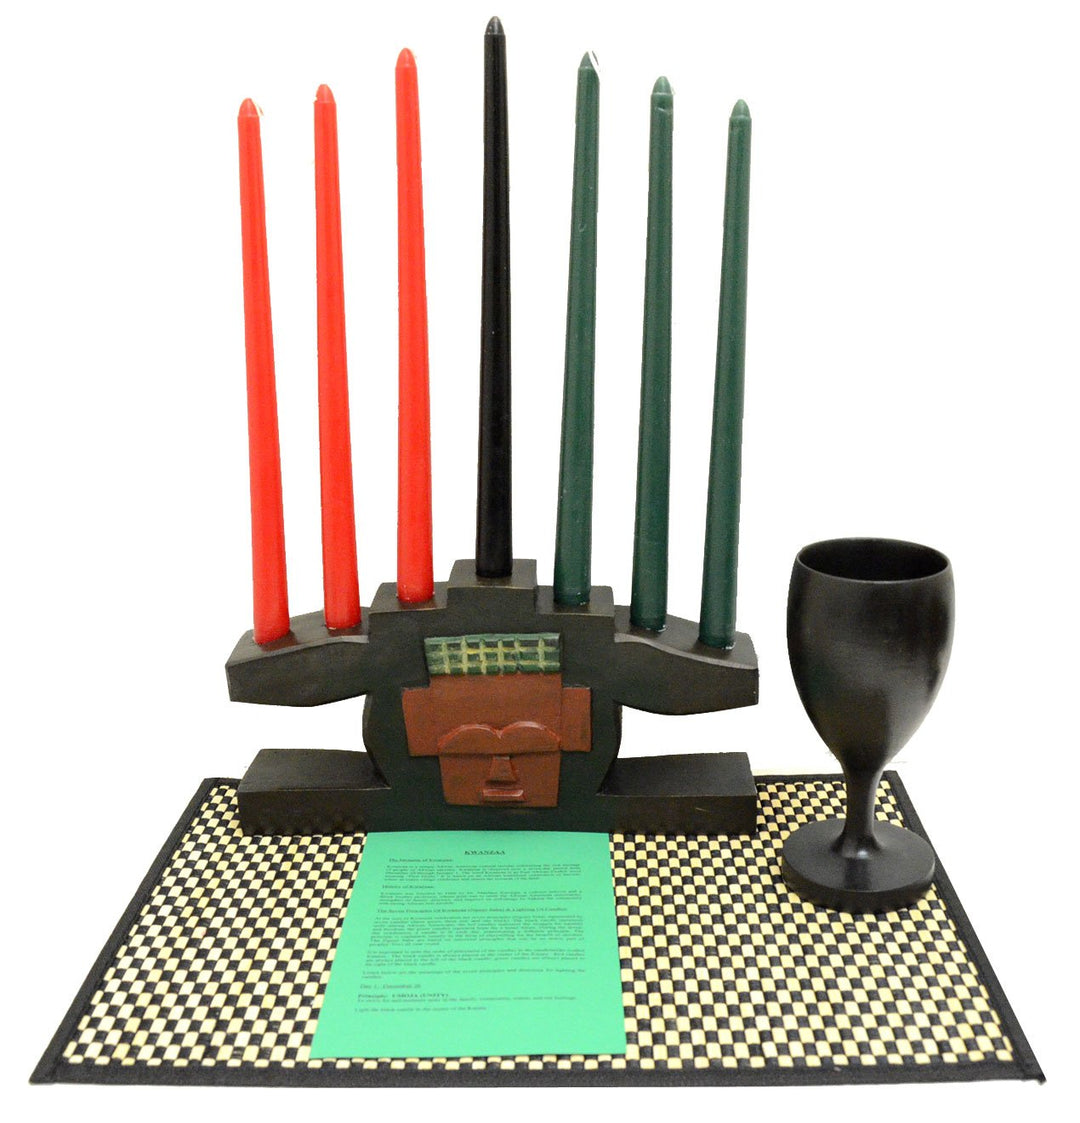 Kwanzaa Mask Celebration Set (Hand Made in Ghana) by African Heritage Collection